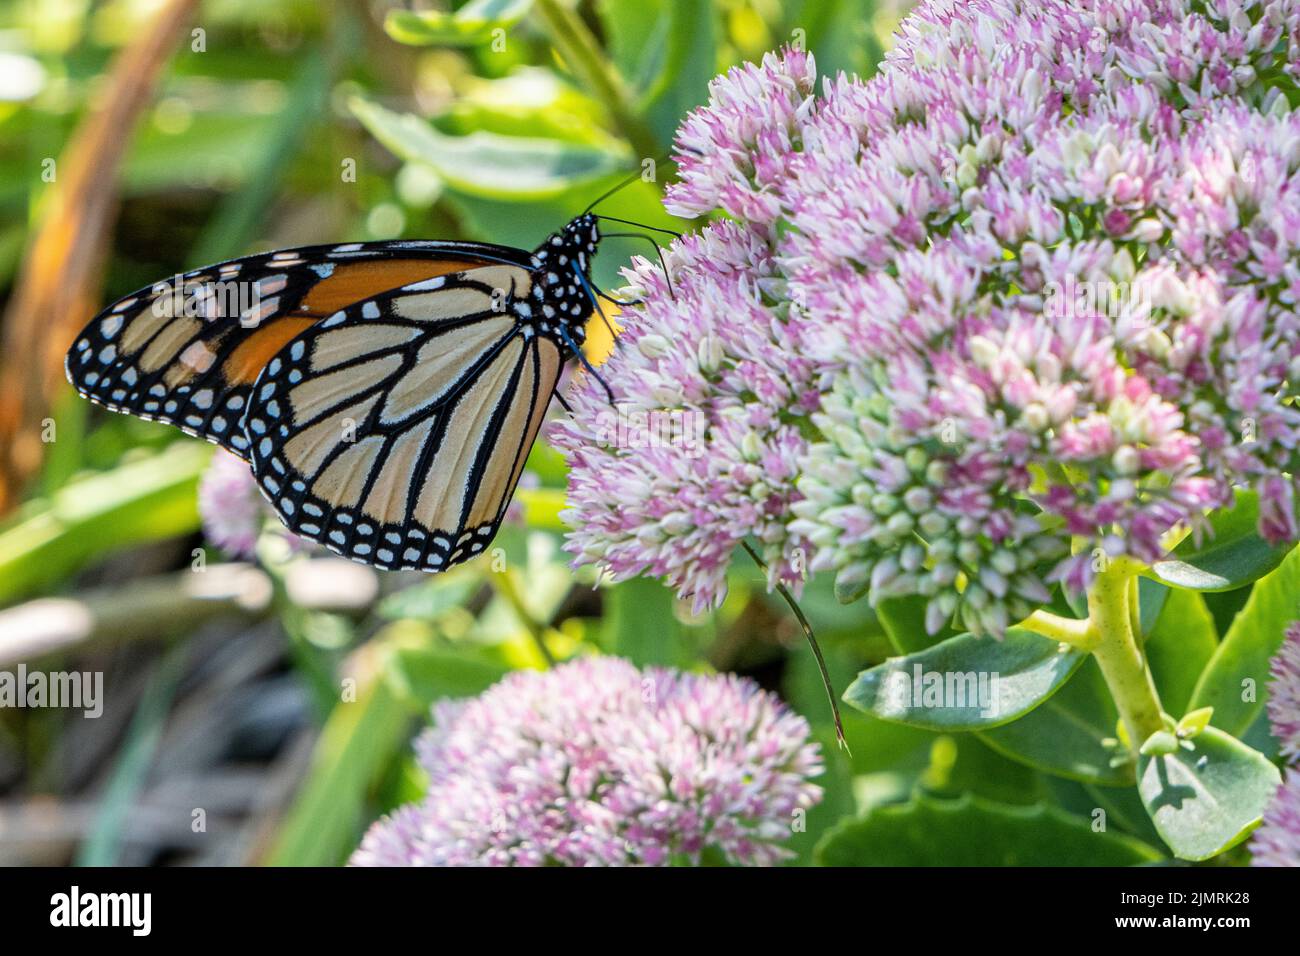 A monarch butterfly on a a milkweed plant Stock Photo